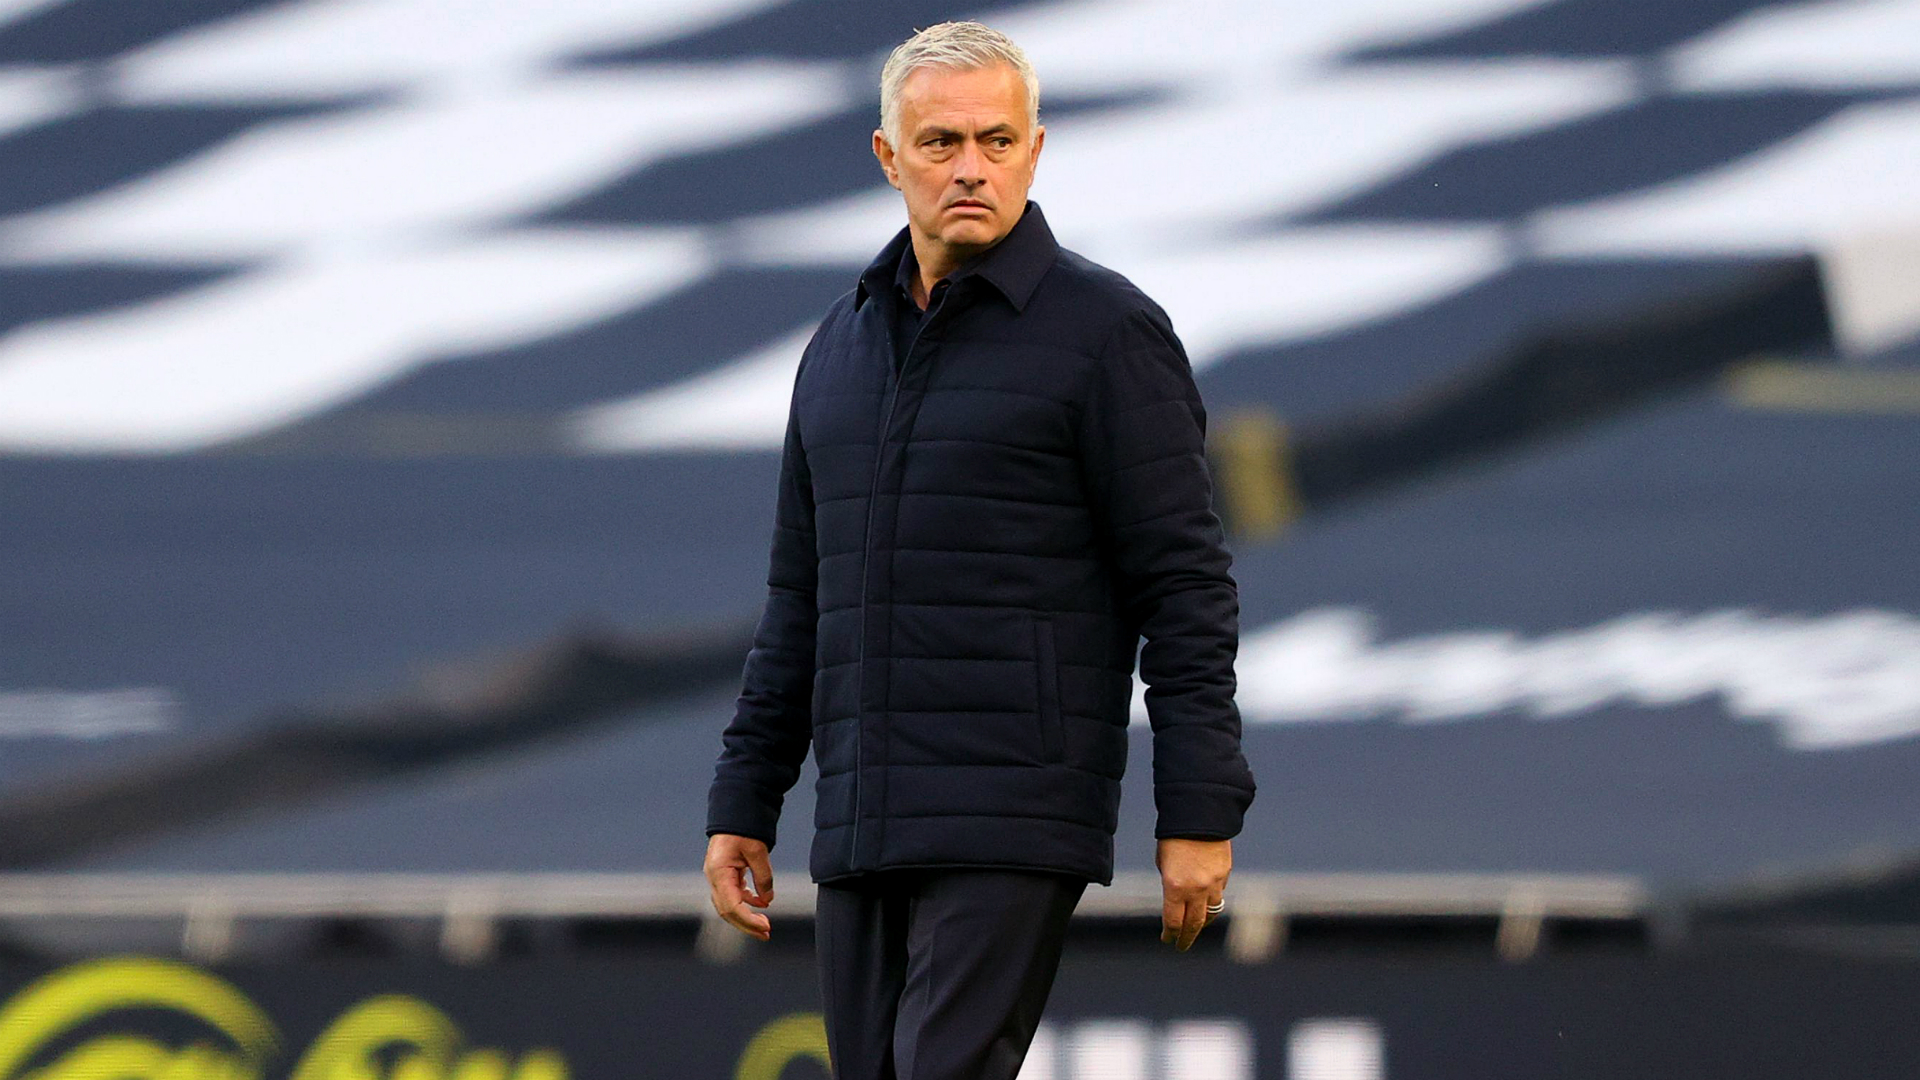 Tottenham boss Jose Mourinho believes the decision to overturn Manchester City's UEFA ban will bring an end to Financial Fair Play.